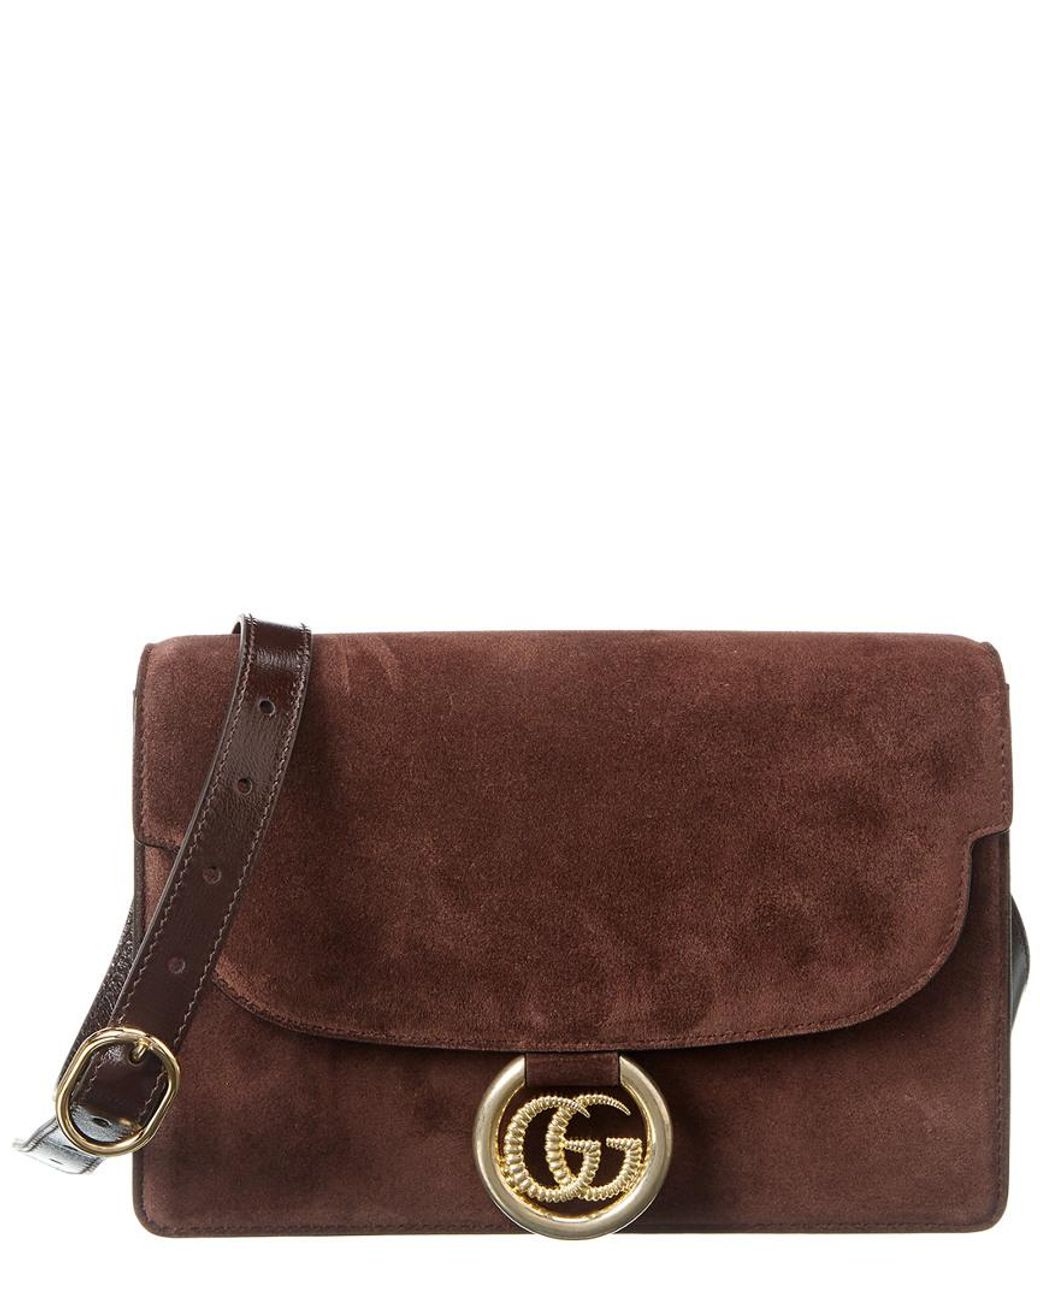 Gucci Torchon Double G Suede Shoulder Bag in Brown | Lyst